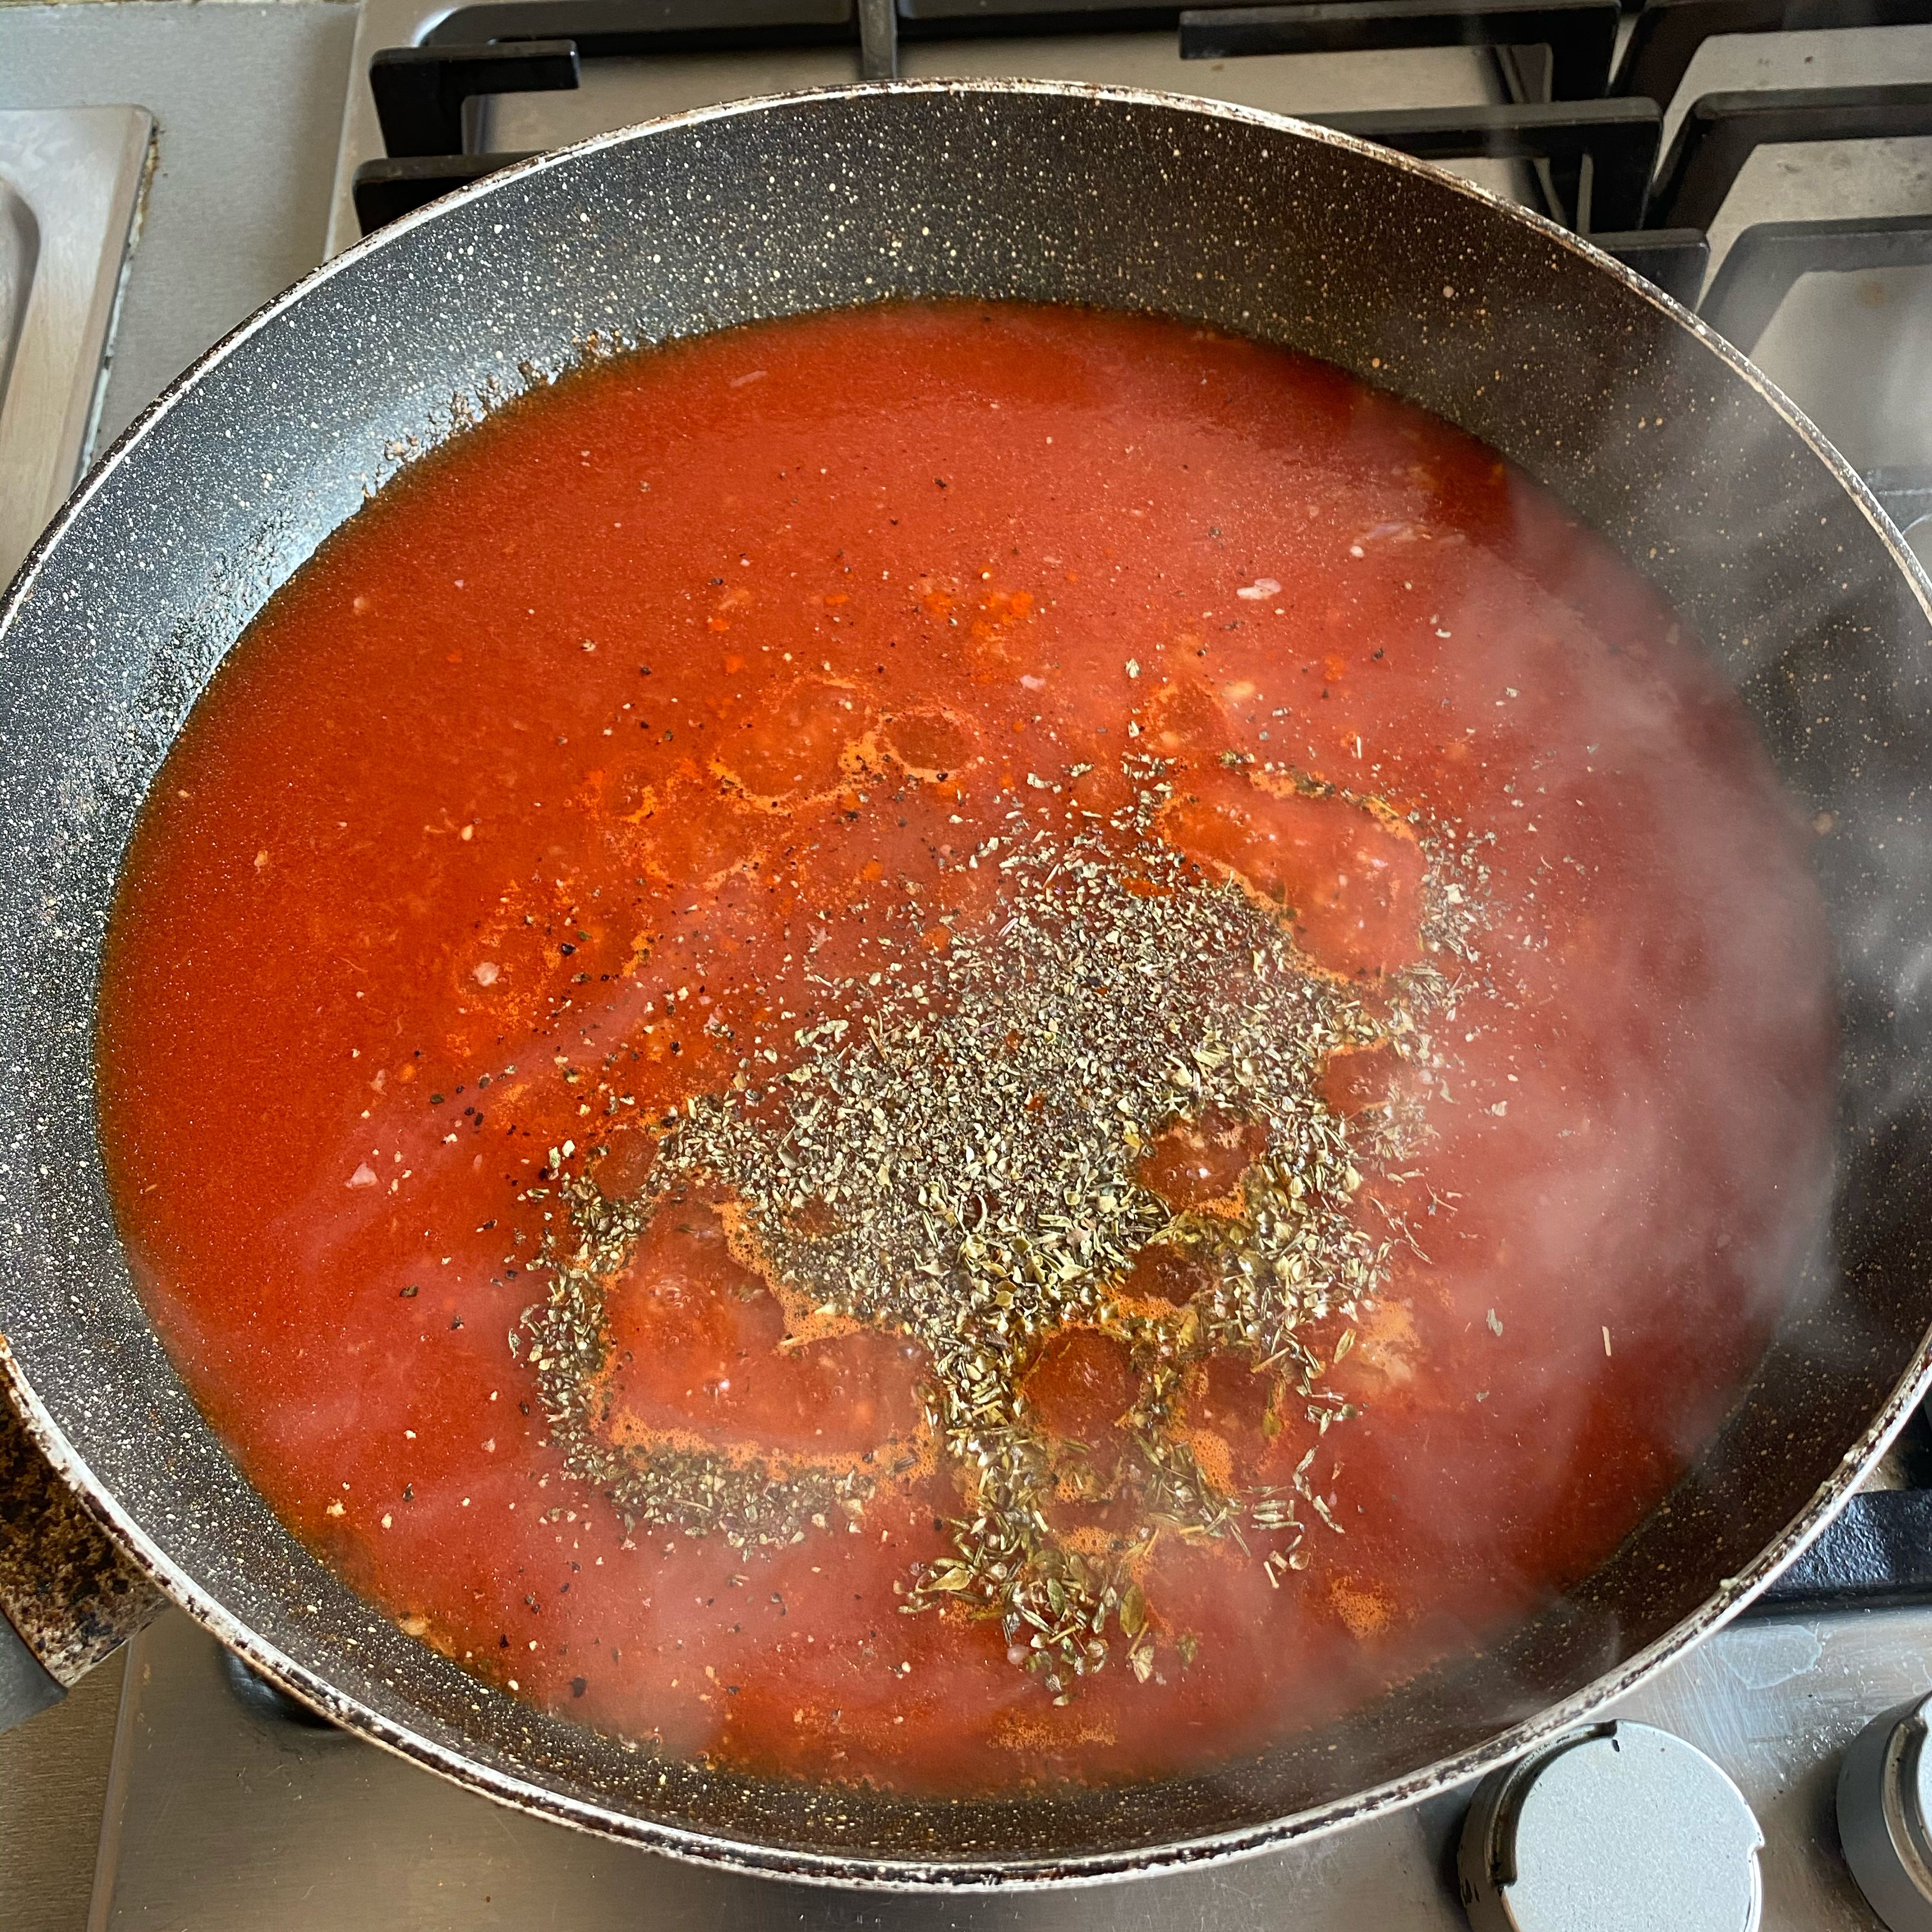 Add the tomato sauce over the sautéed garlic. Turn the heat to low. While the tomato sauce is cooking, add the spices.